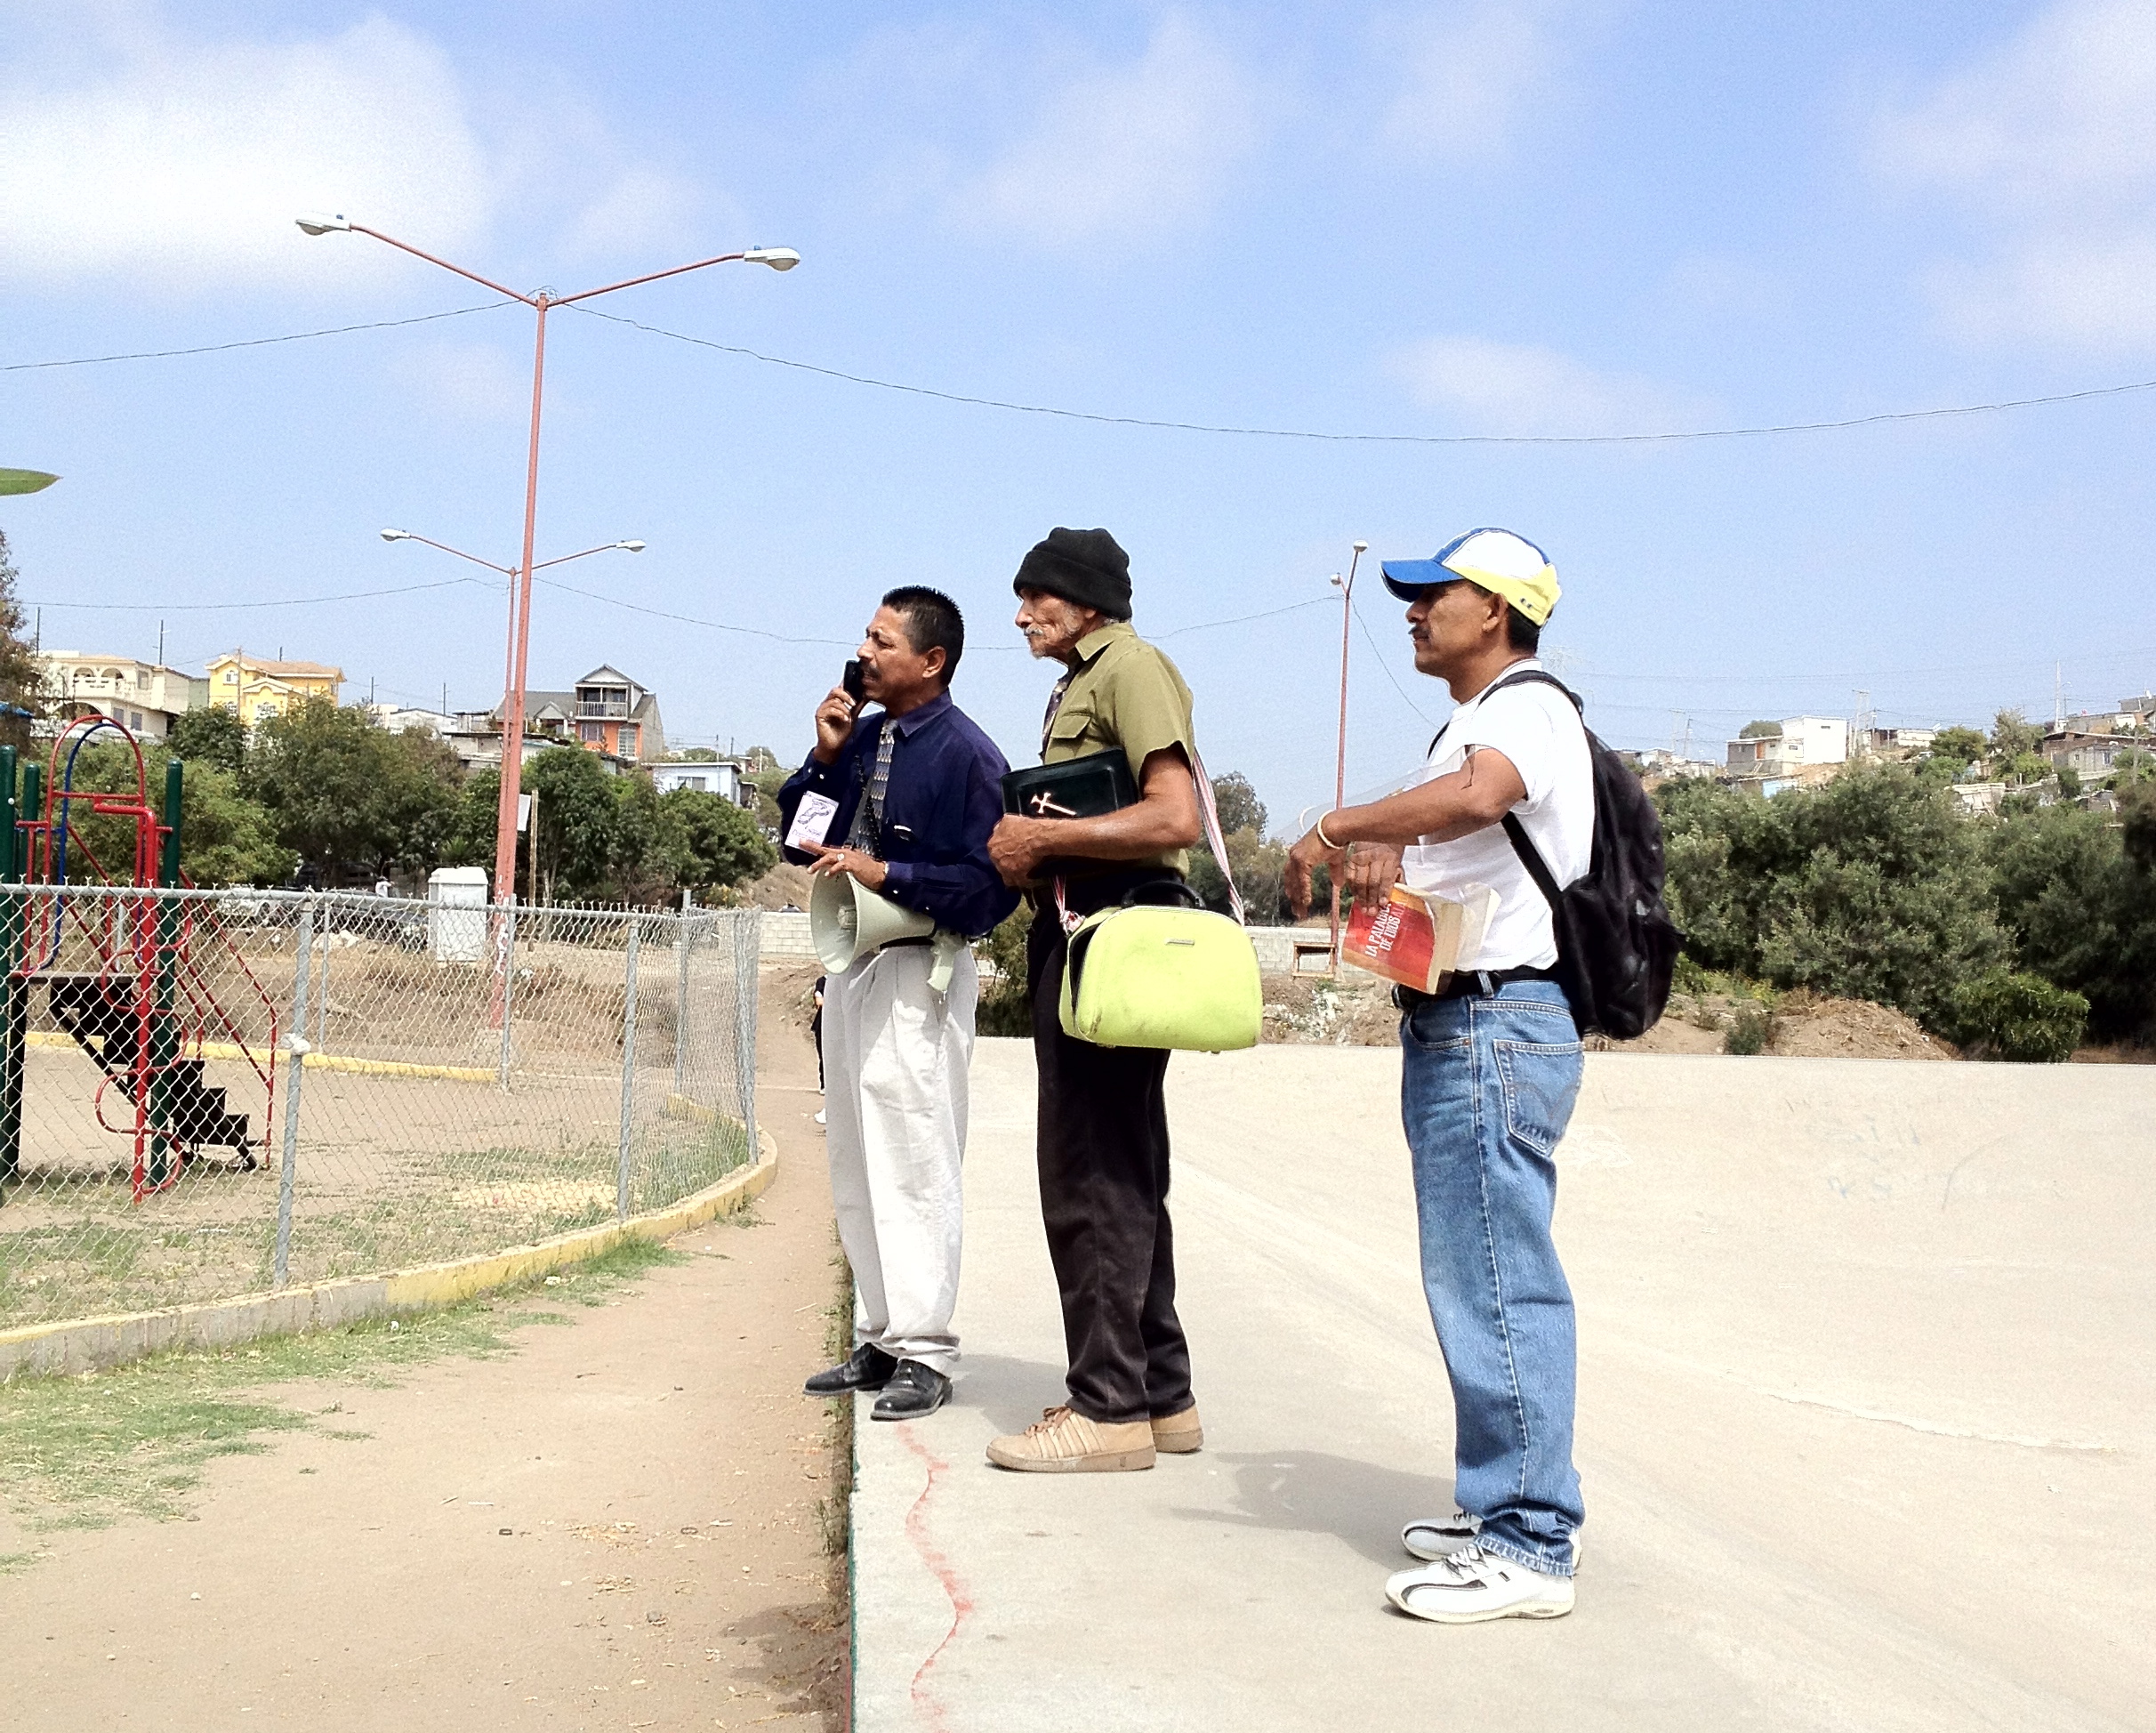 Some of the guys we were out sharing with In Rosarito